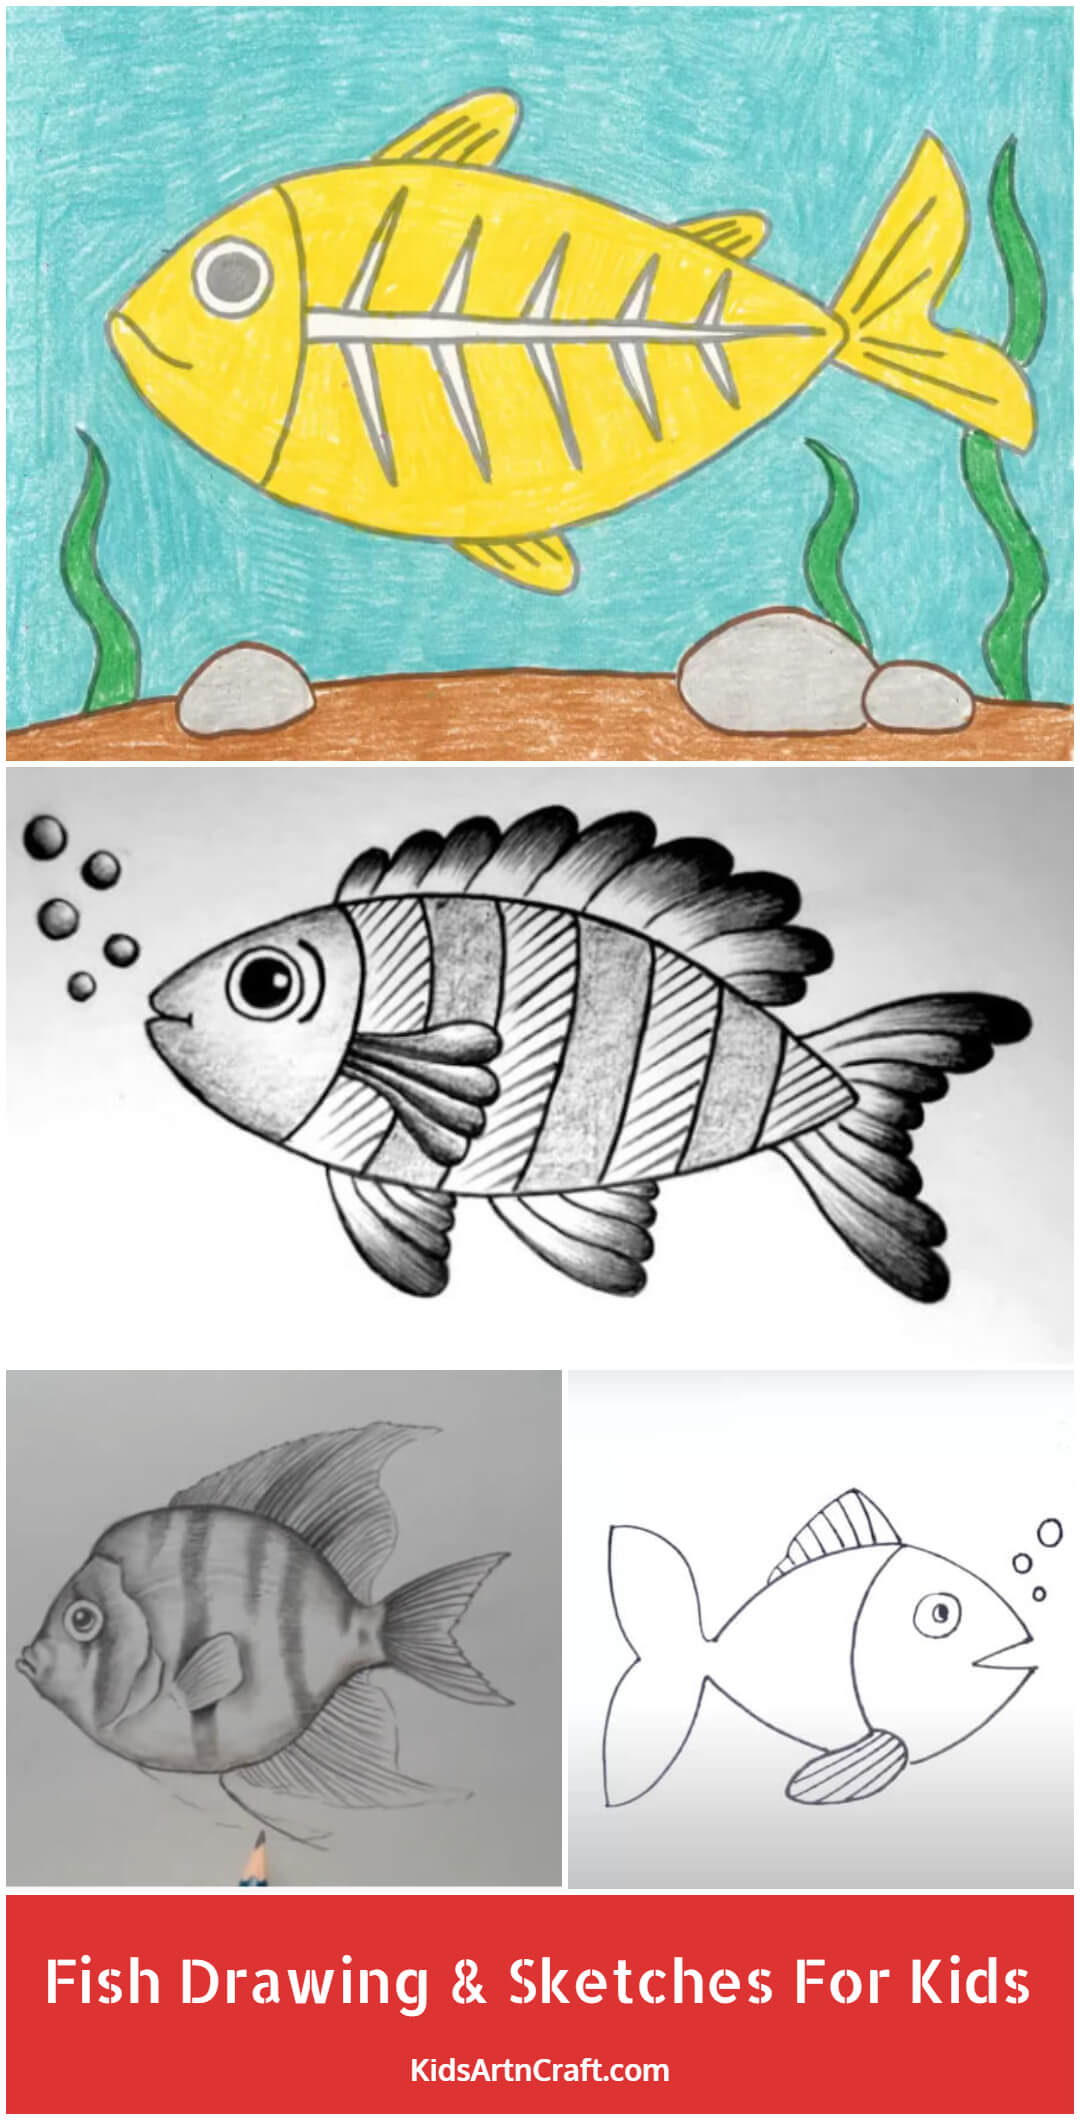 Fish Drawing & Sketches For Kids